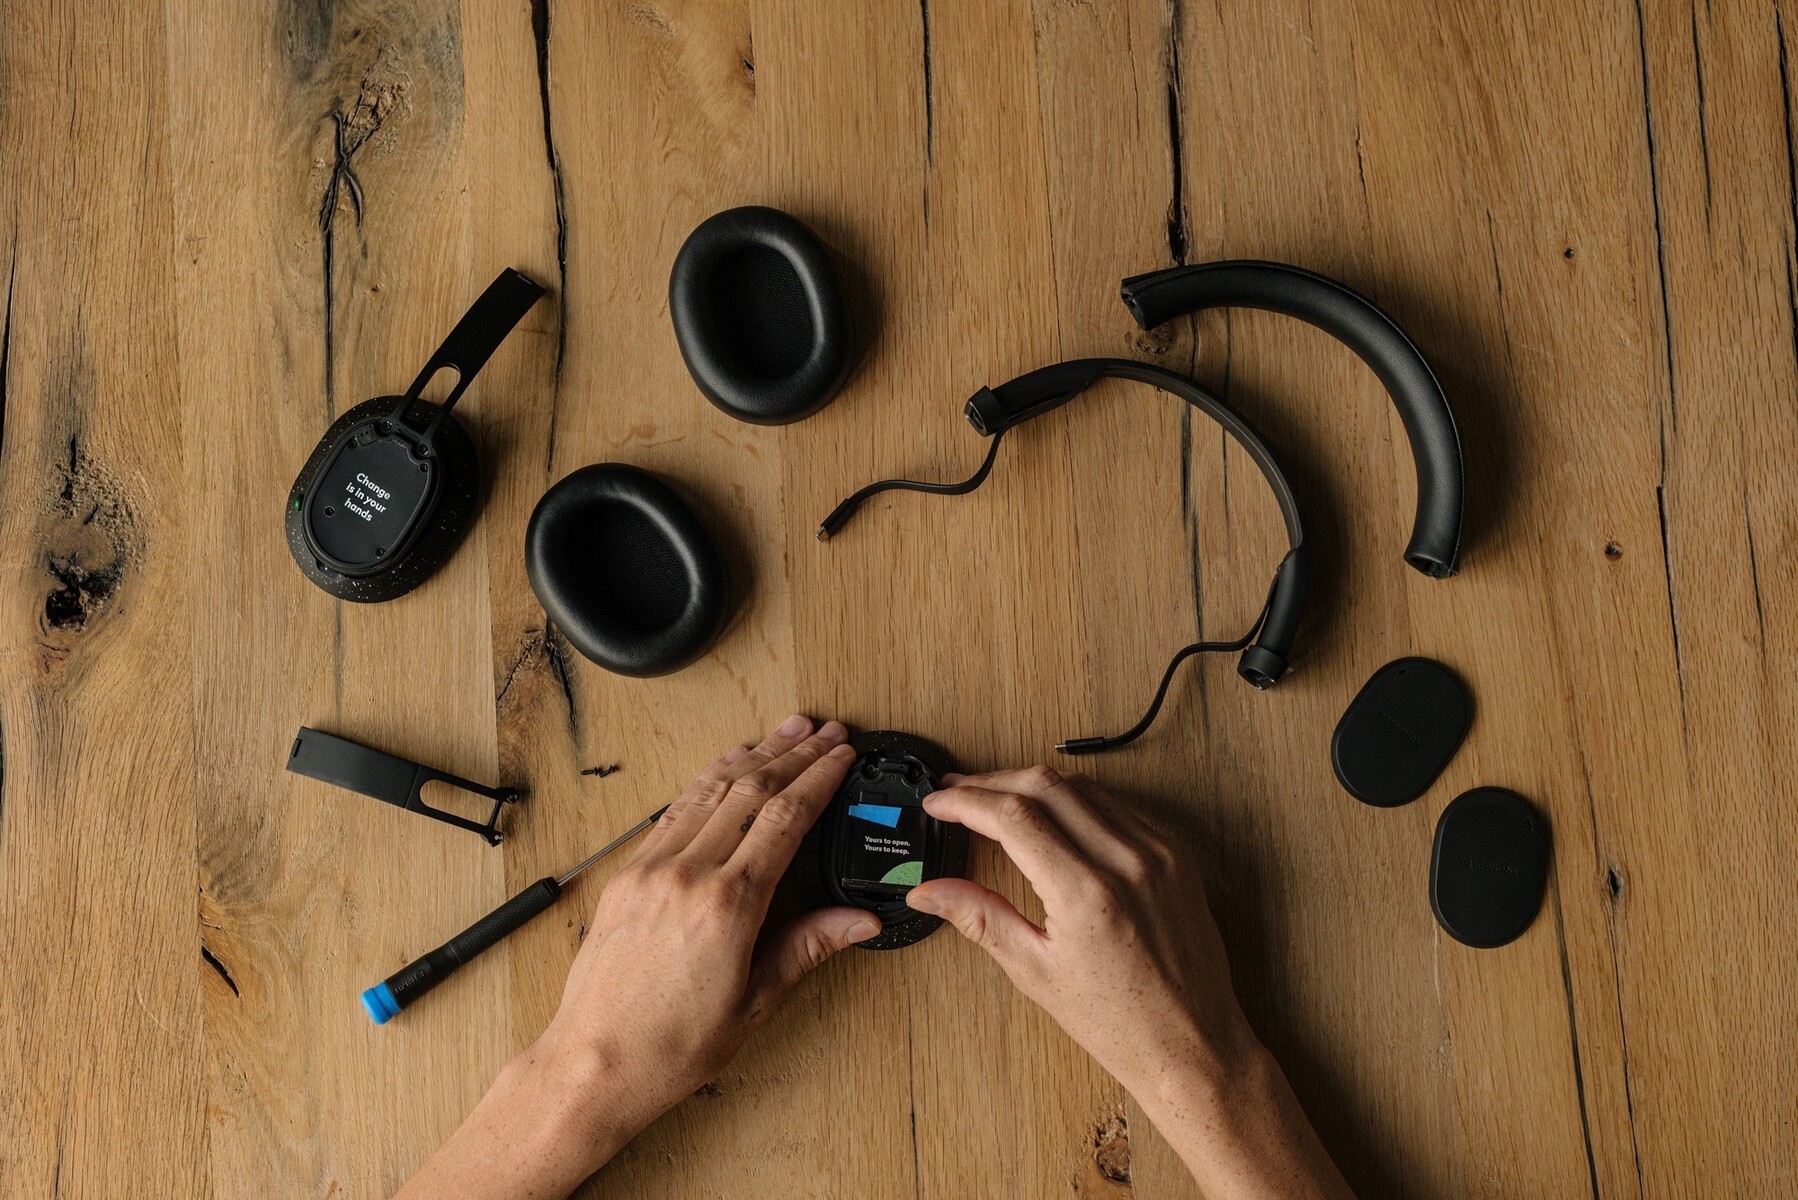 Fairphone debuts Fairbuds XL as new sustainable over-ear headphones with  premium features - NotebookCheck.net News | Over-Ear-Kopfhörer